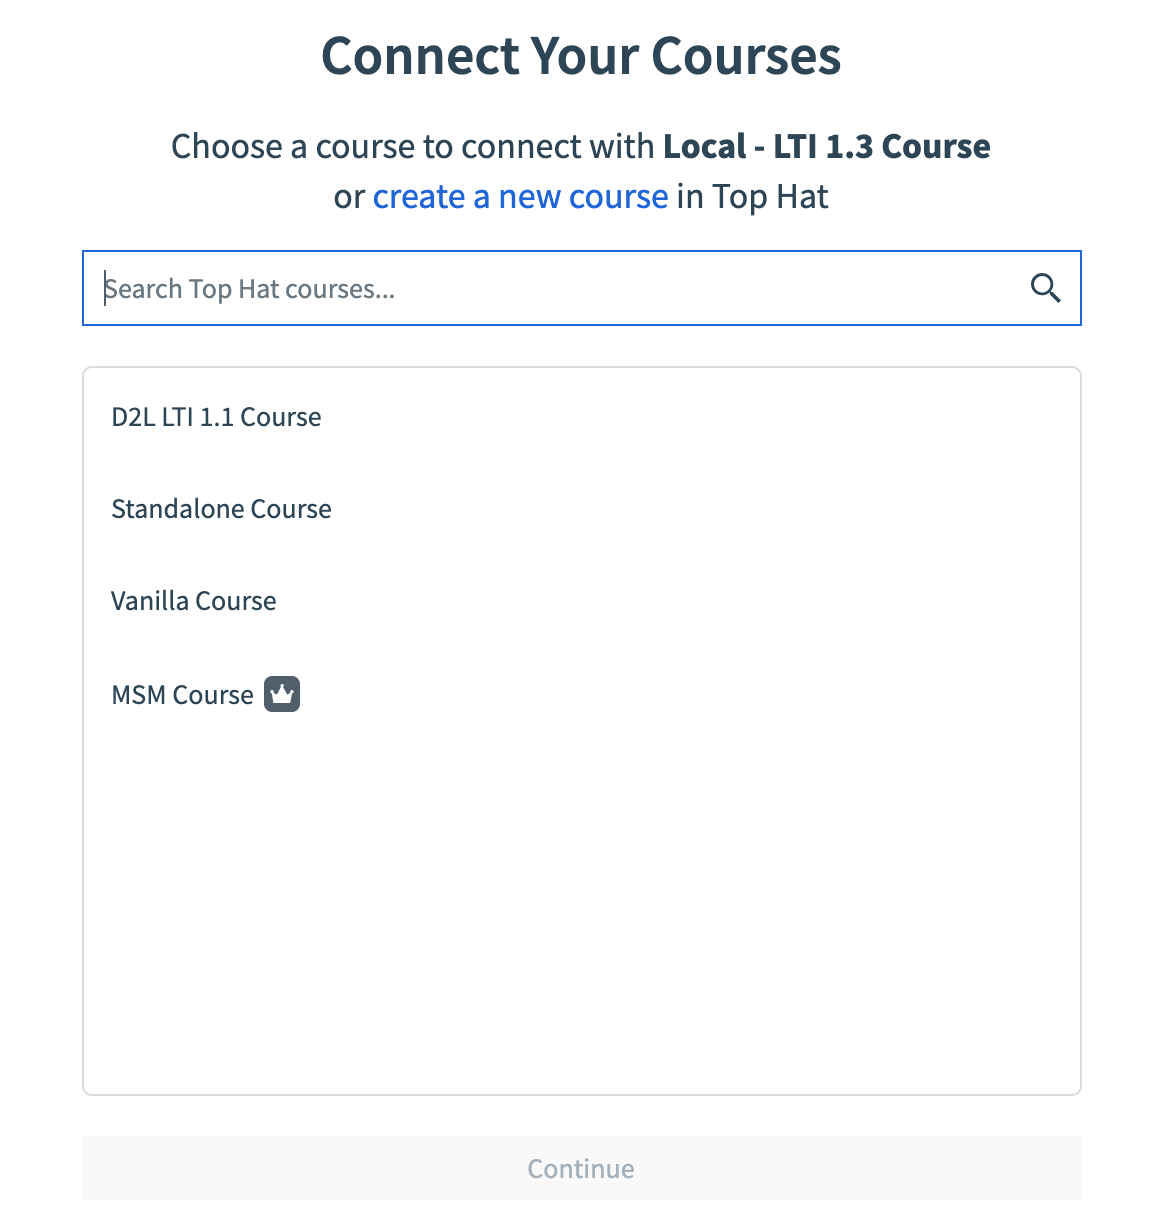 Connect Your Courses prompt displayed with Continue highlighted